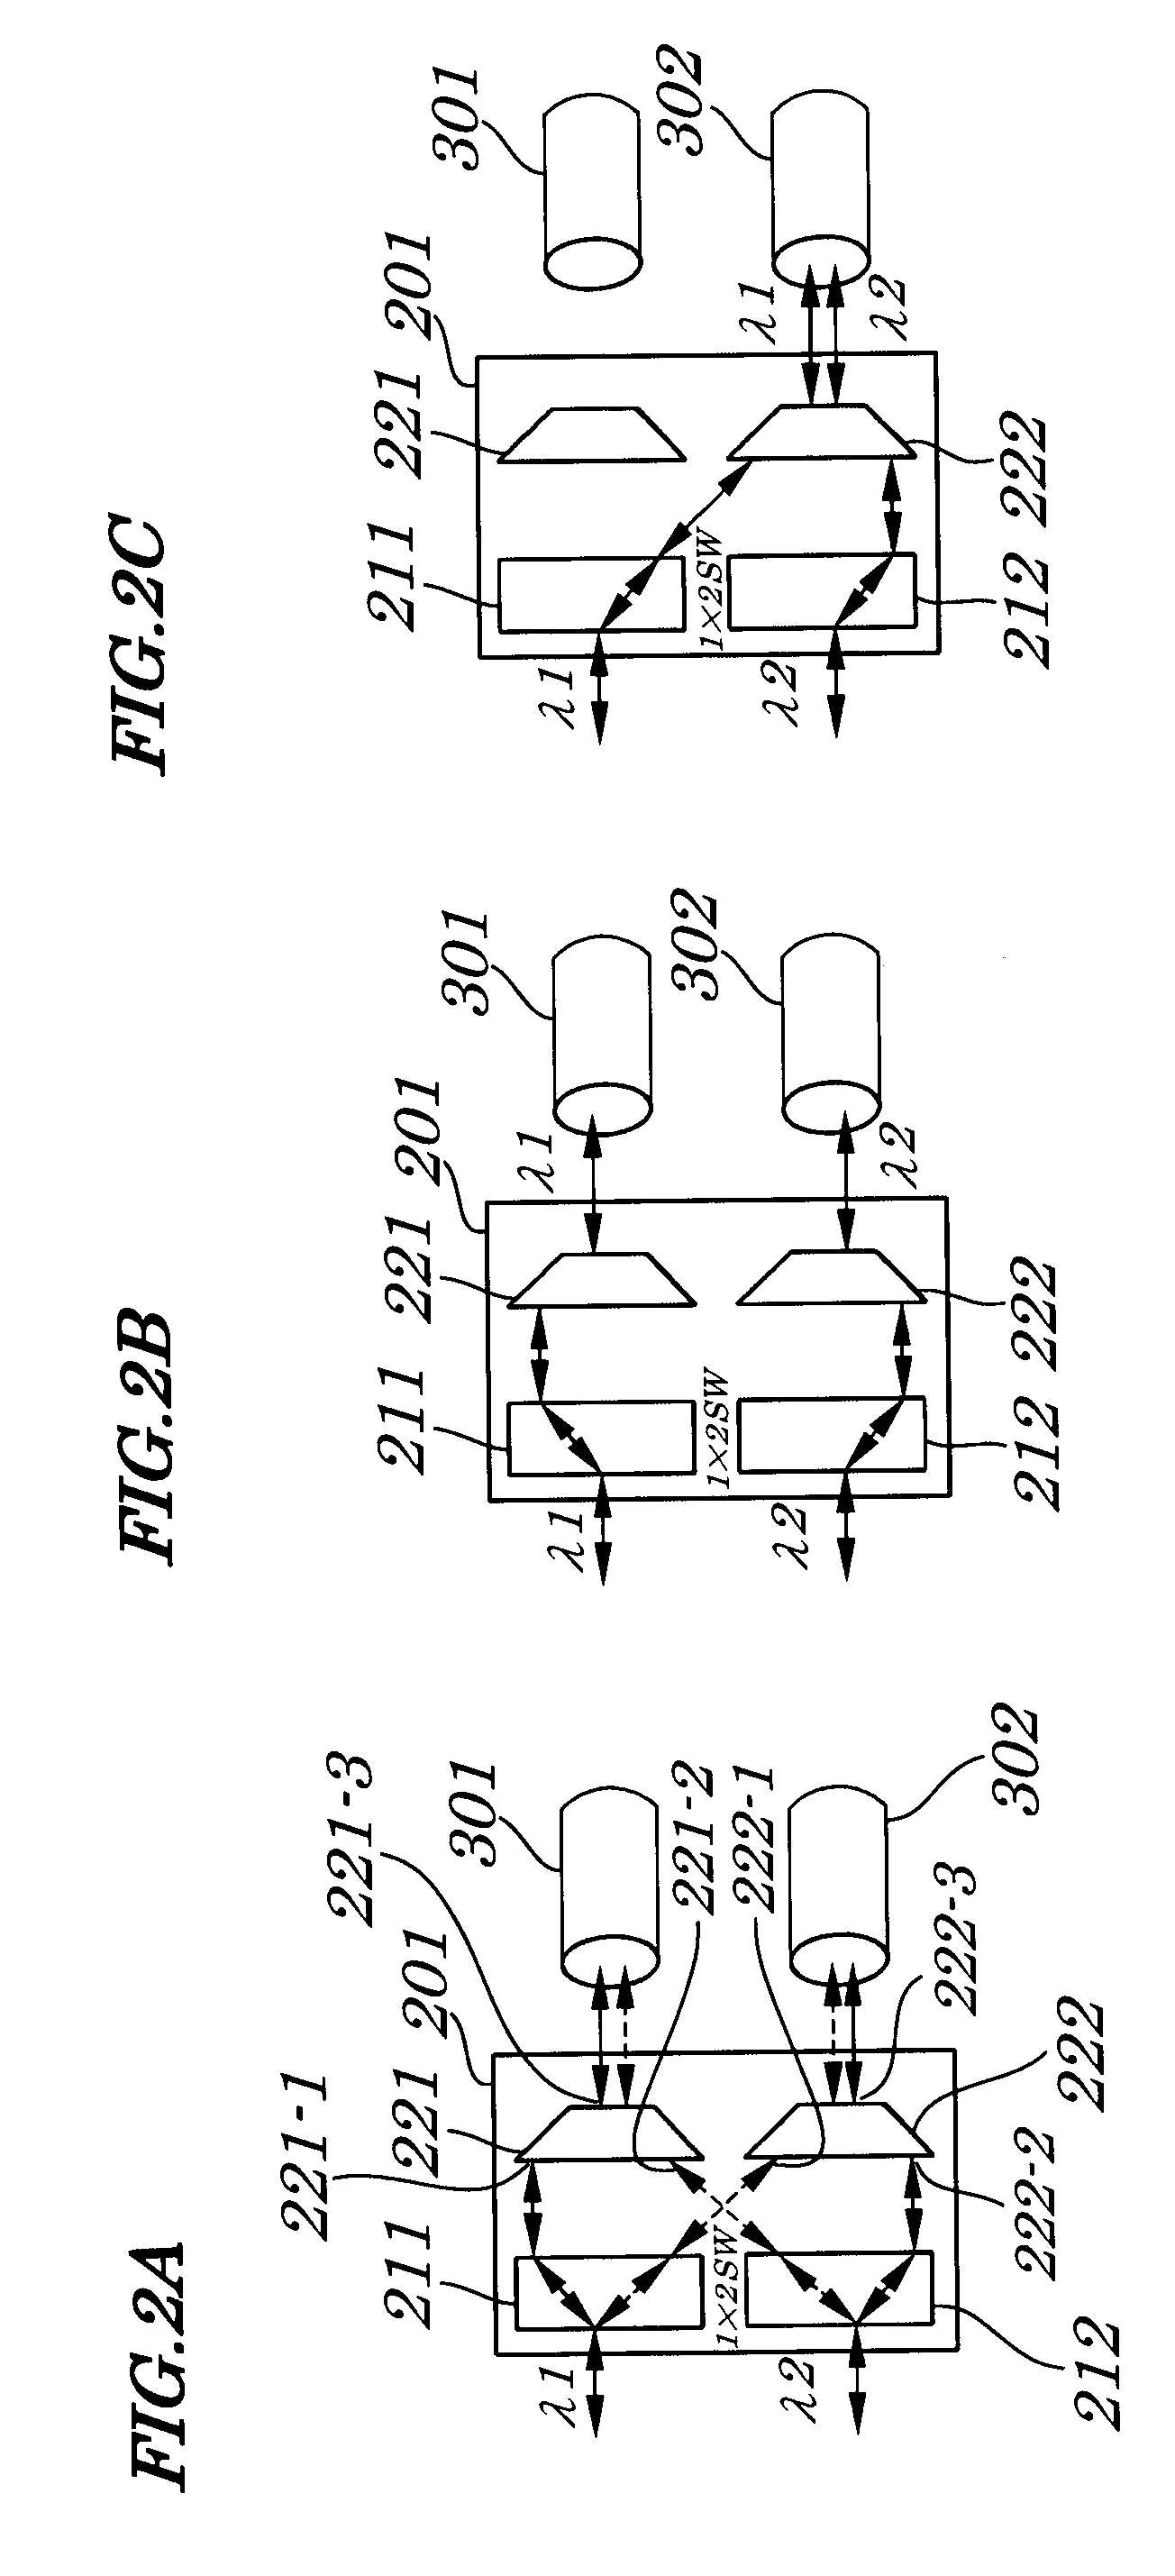 Optical signal switching device for use in an optical protection network